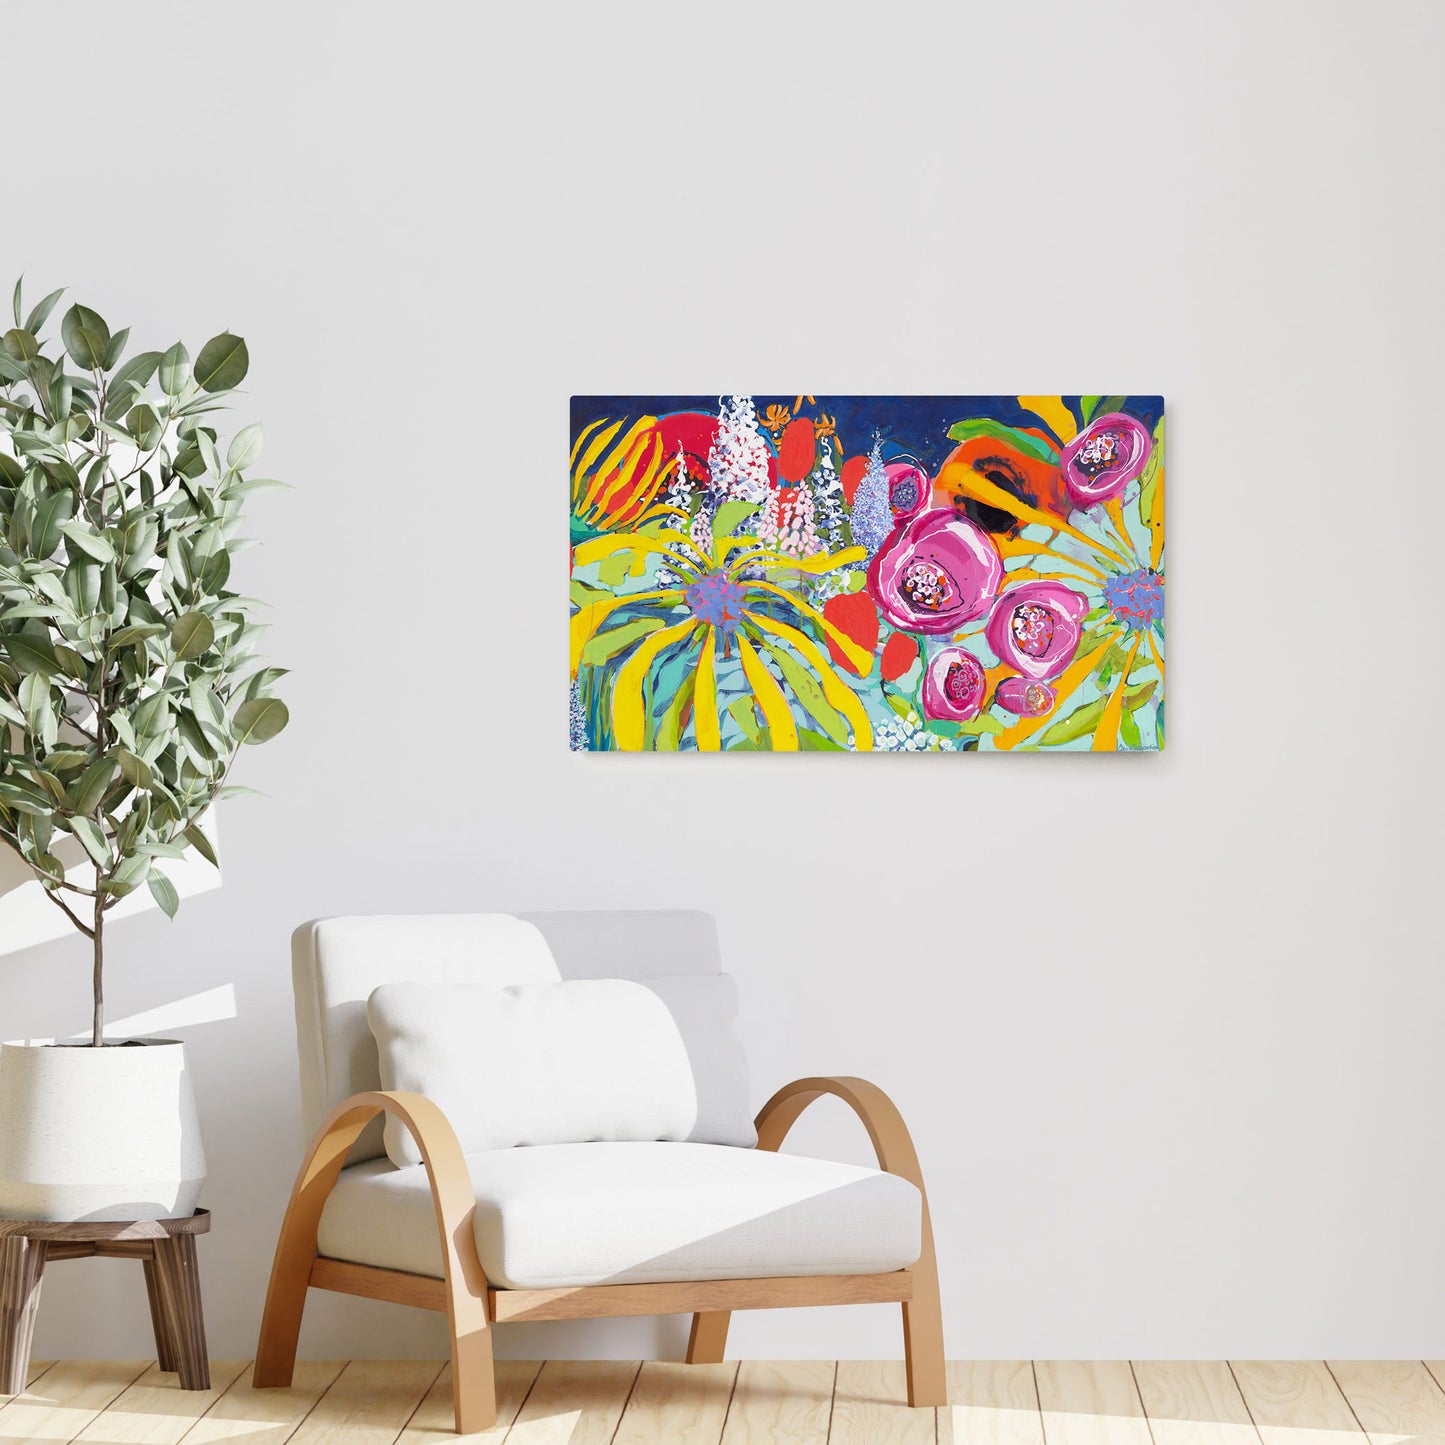 Claire Desjardins' Overgrown and Wild painting reproduced on HD metal print and displayed on wall